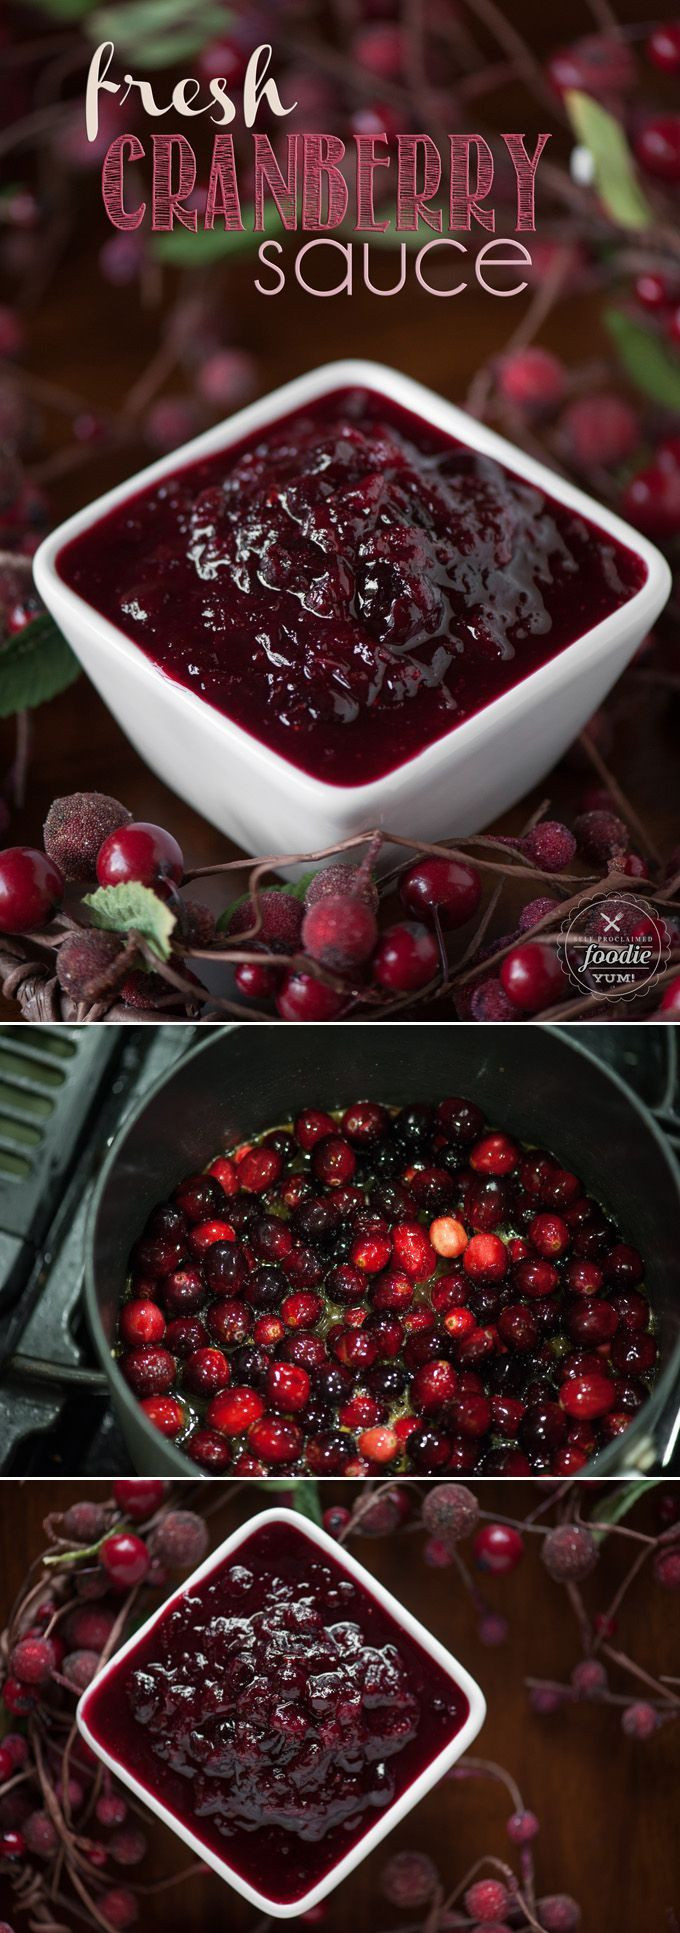 Cranberry Recipes For Thanksgiving
 17 Best ideas about Cranberry Sauce on Pinterest